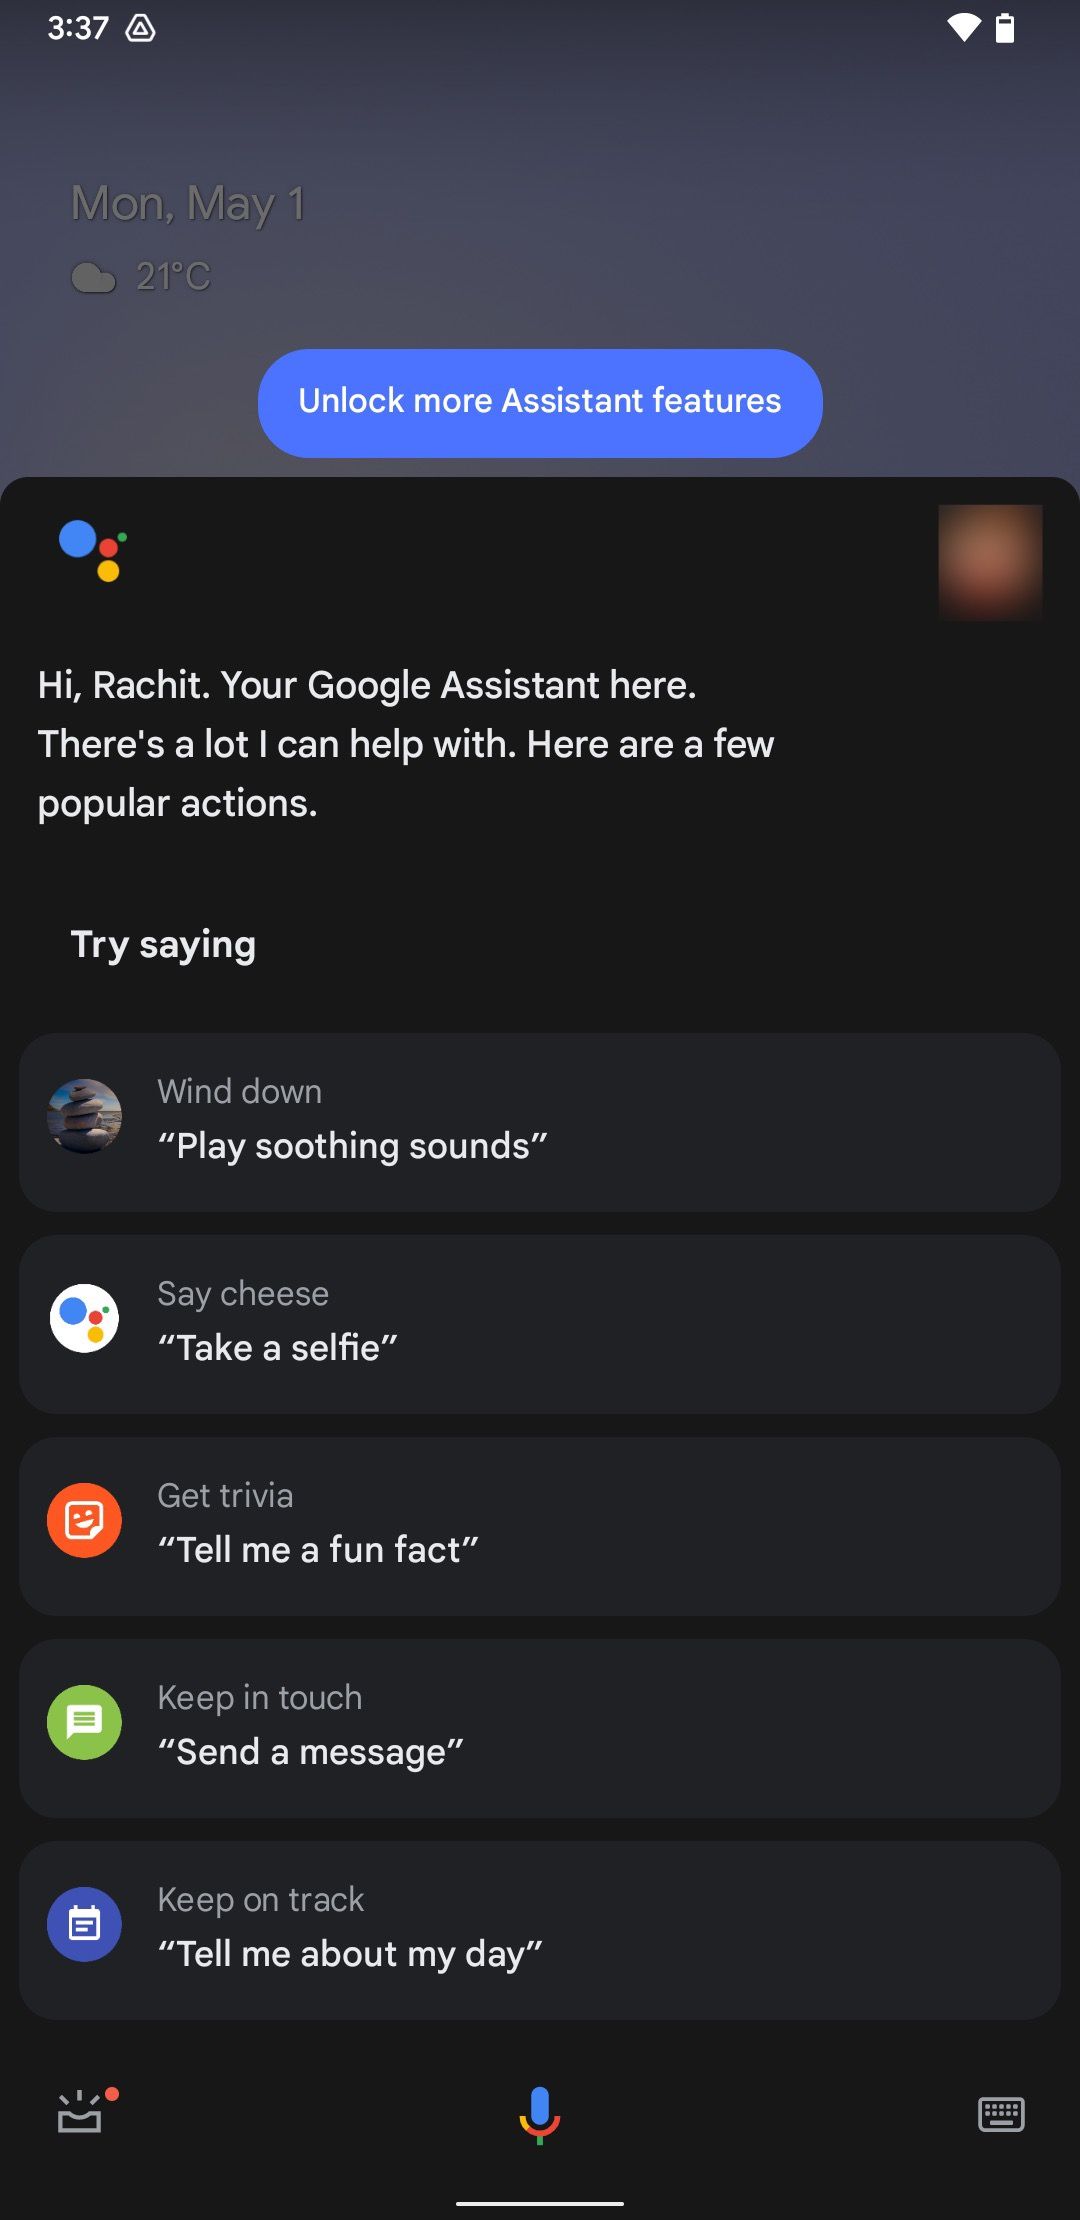 Google Assistant popular actions page screenshot